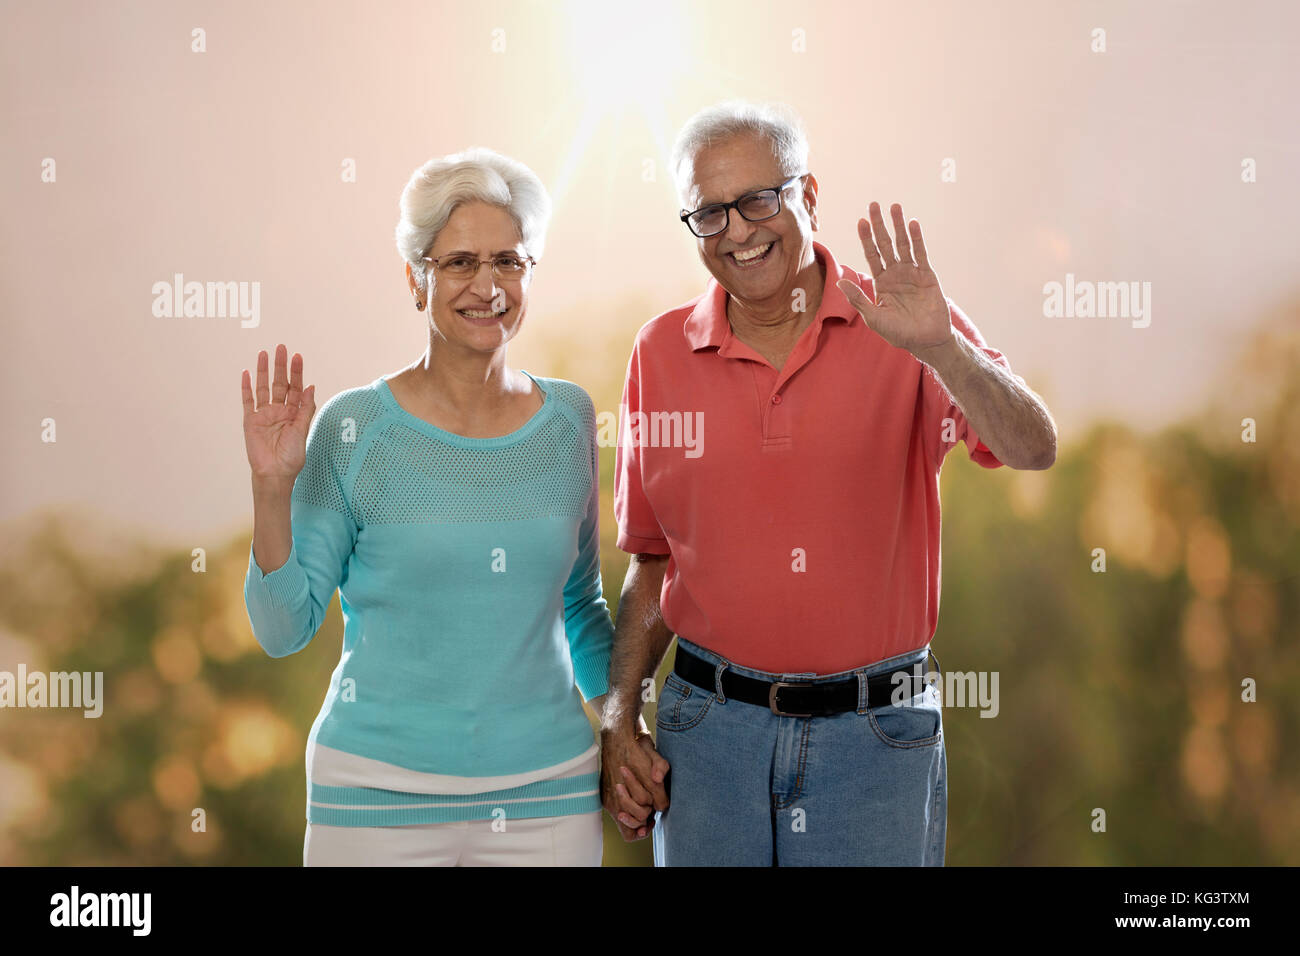 Smiling senior couple standing outdoors in nature and waving hands Stock Photo